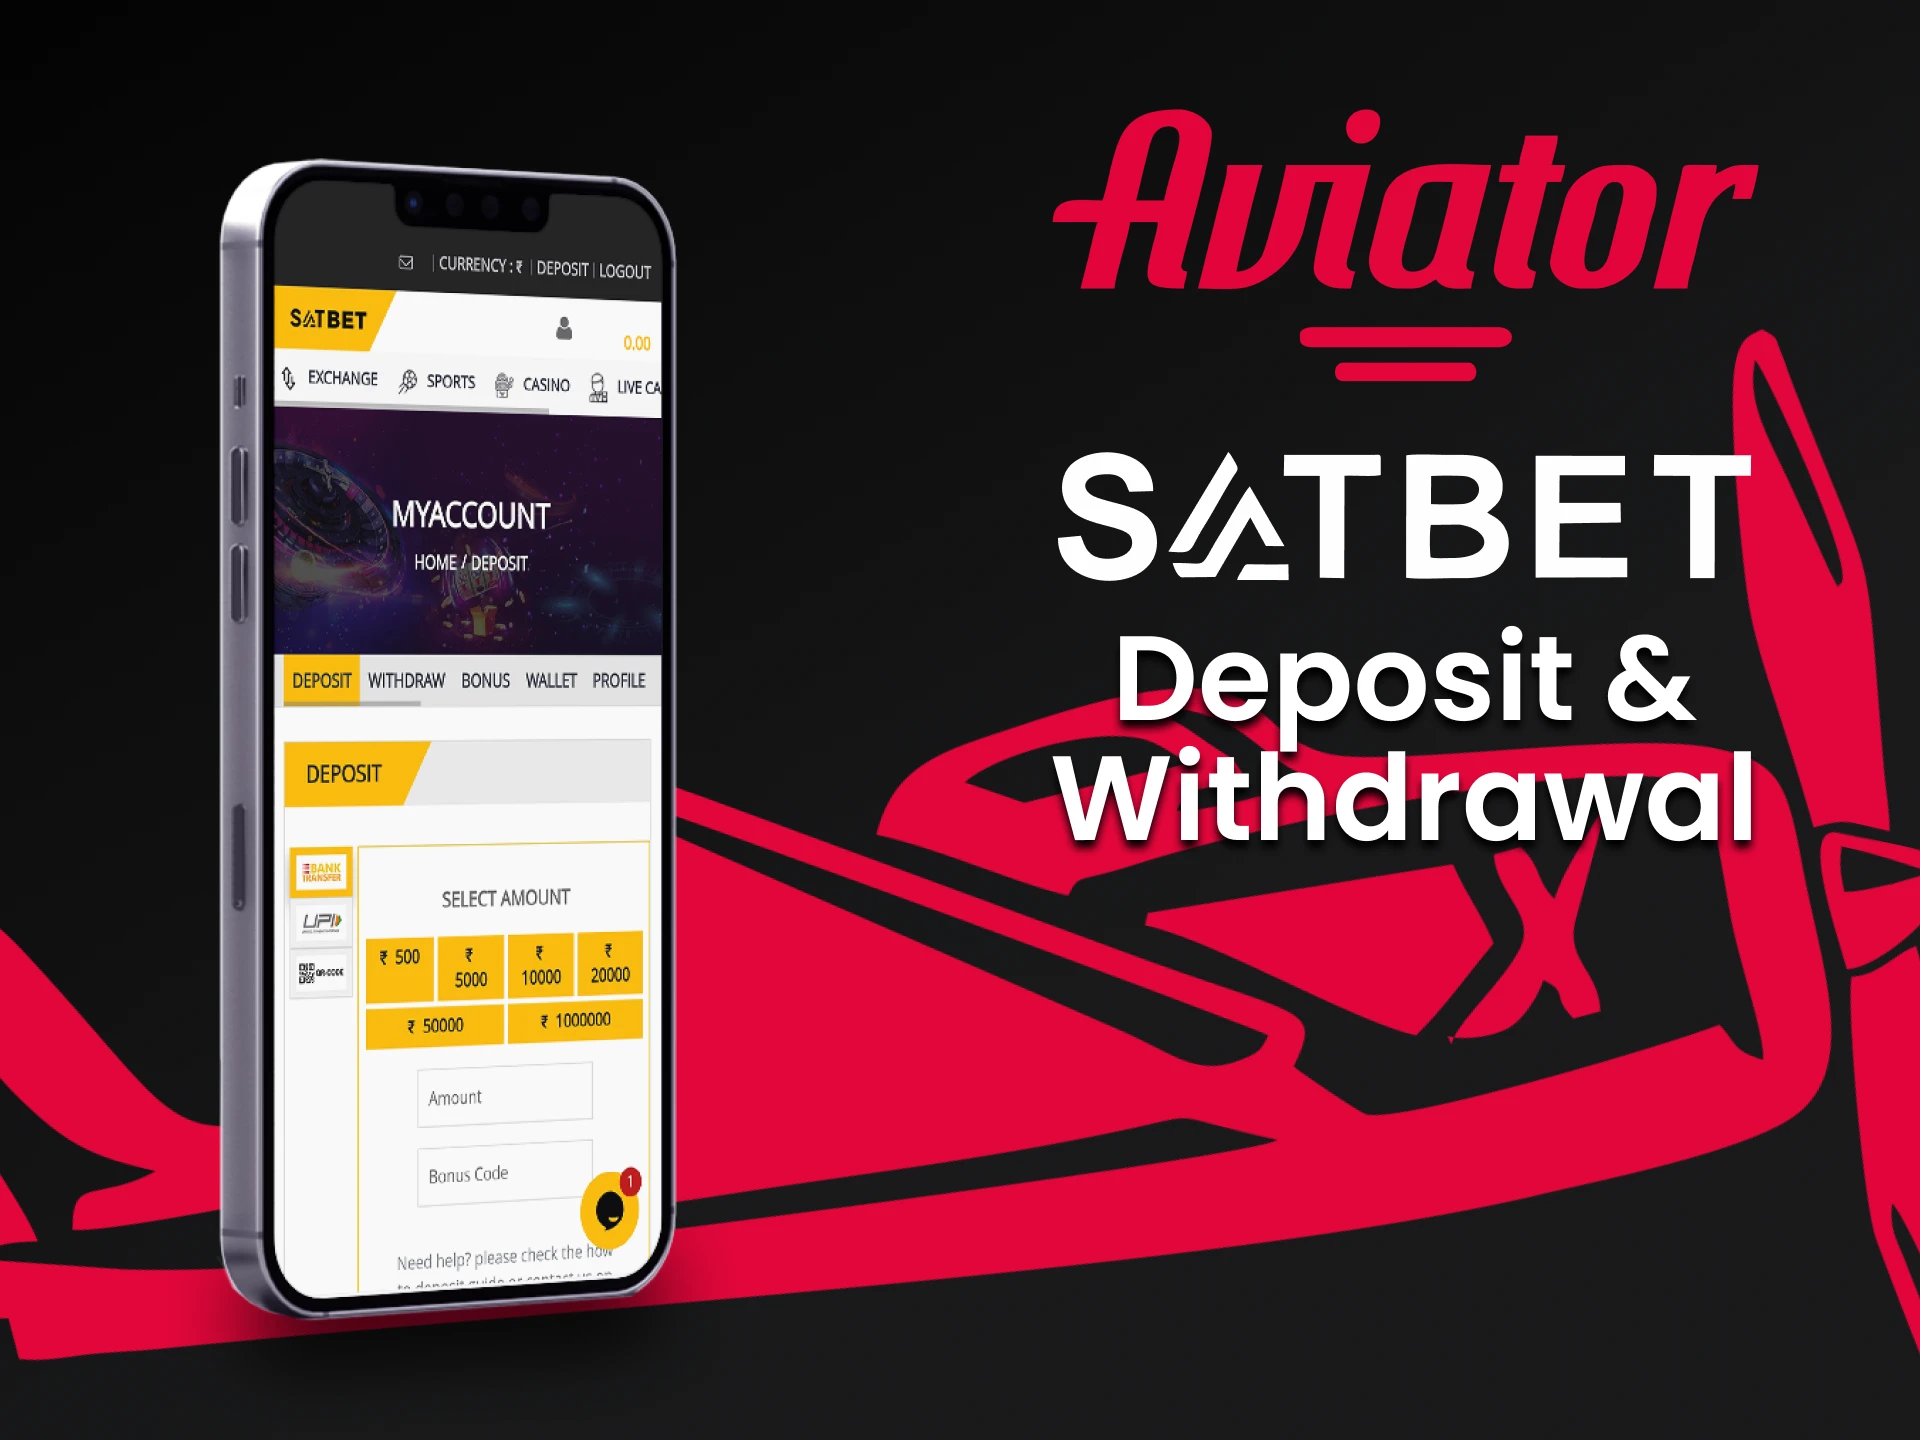 Deposit funds and withdraw for the Aviator game through the Satbet application.